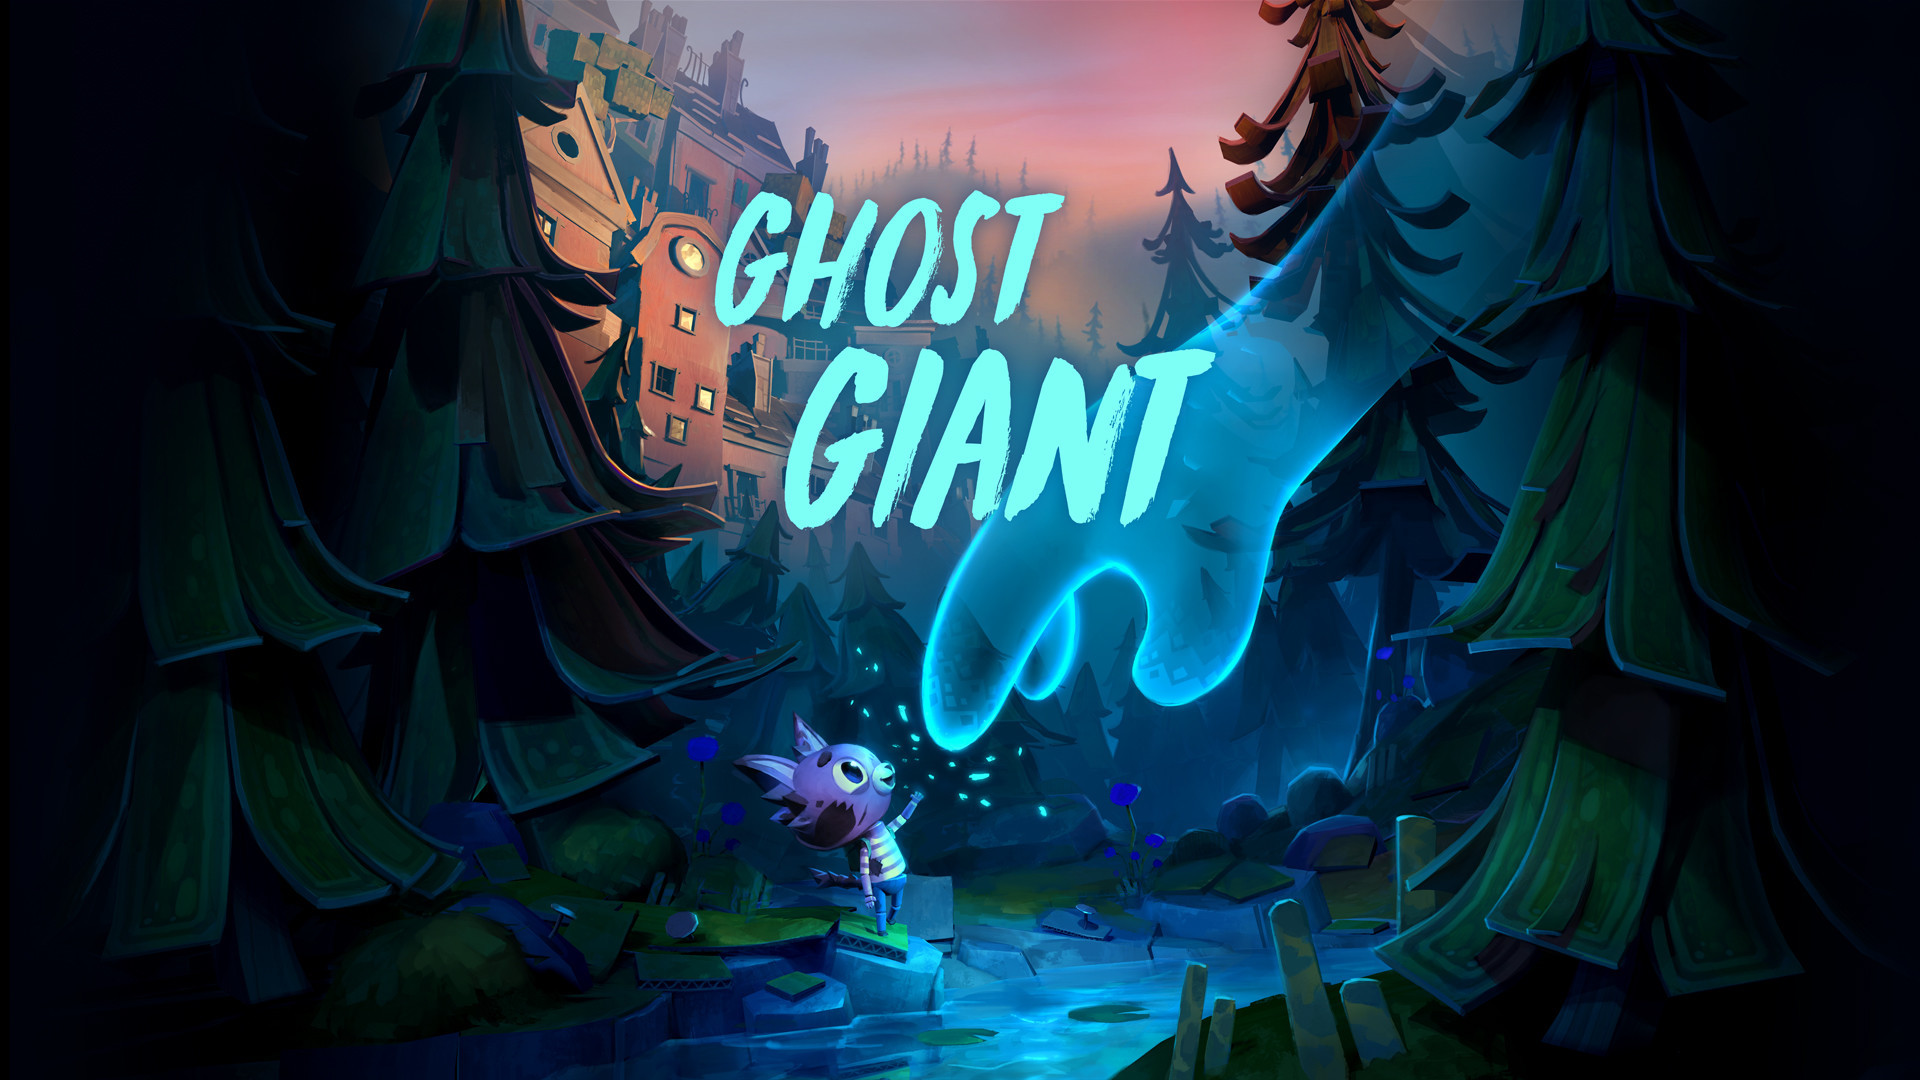 oculus ghost giant download